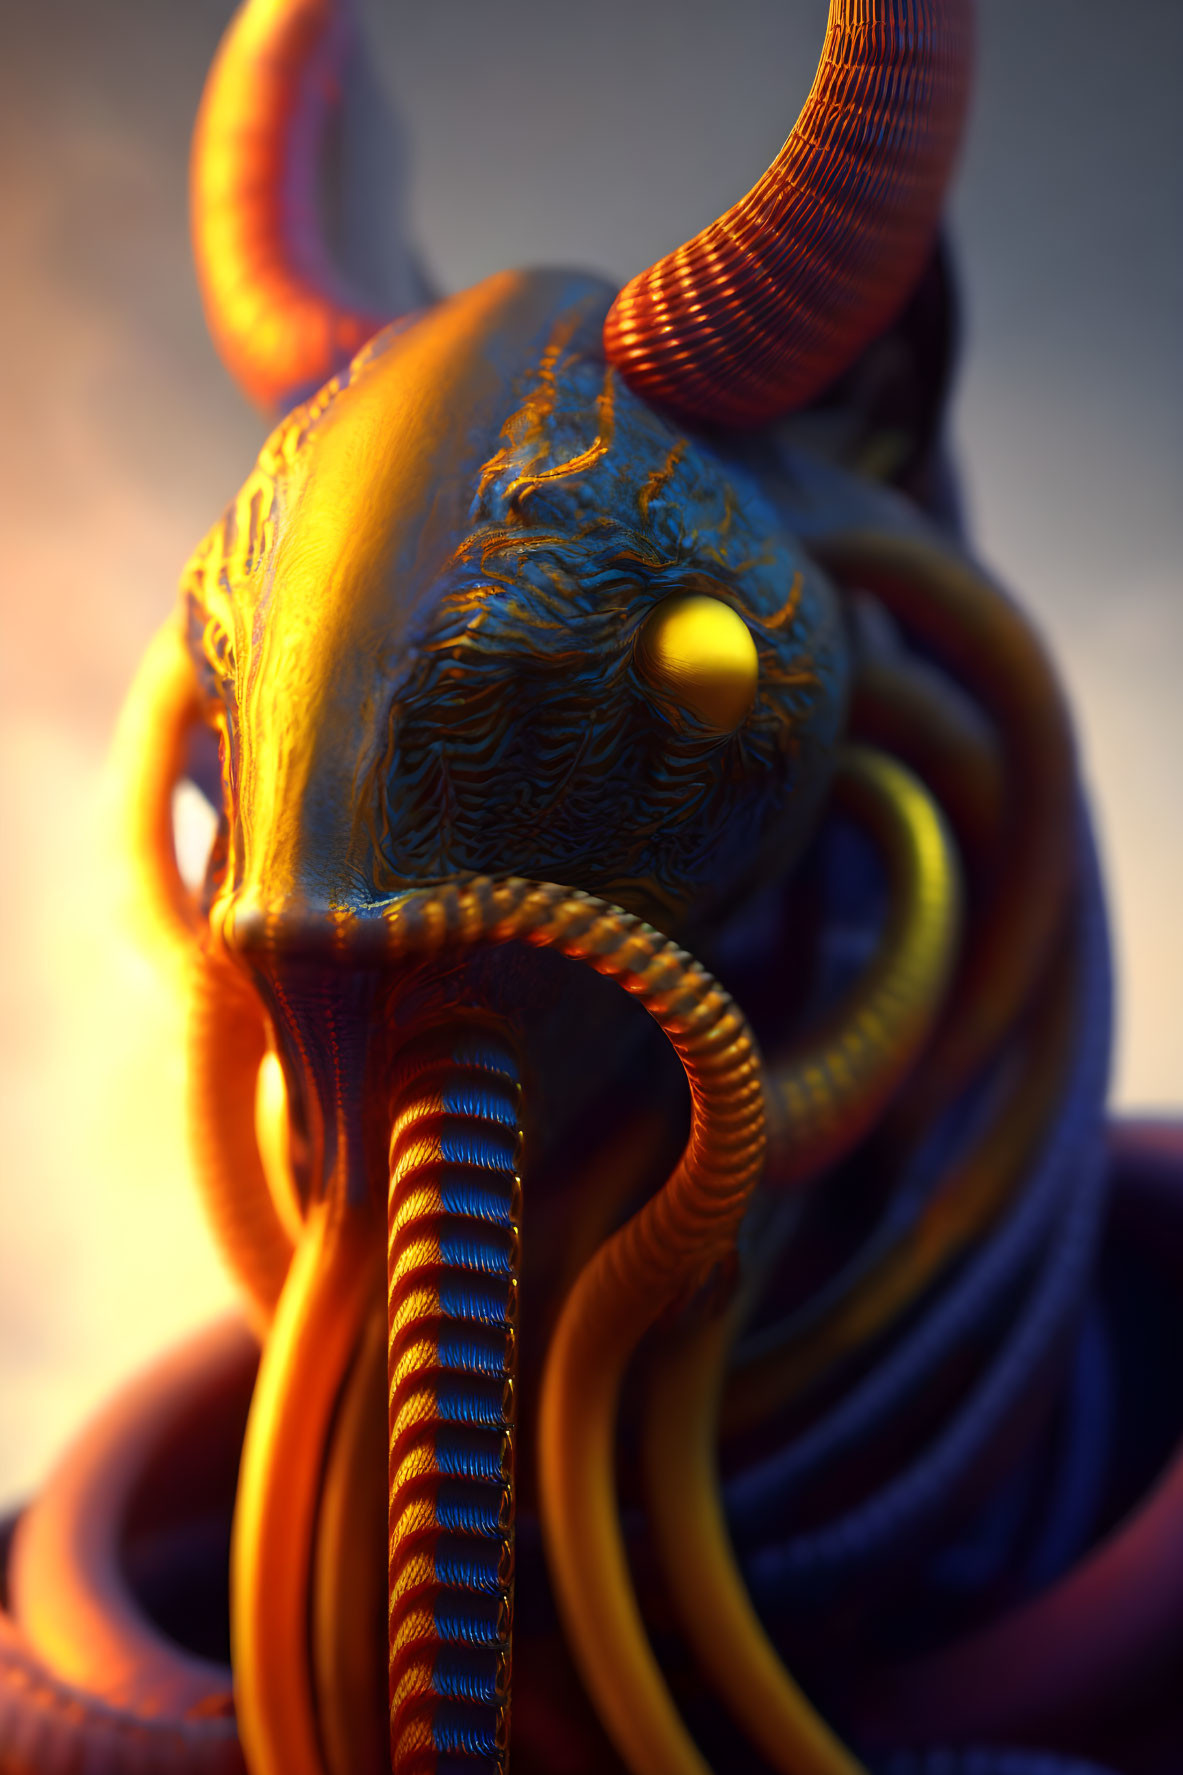 Colorful horned creature with yellow eye and striped tentacles.